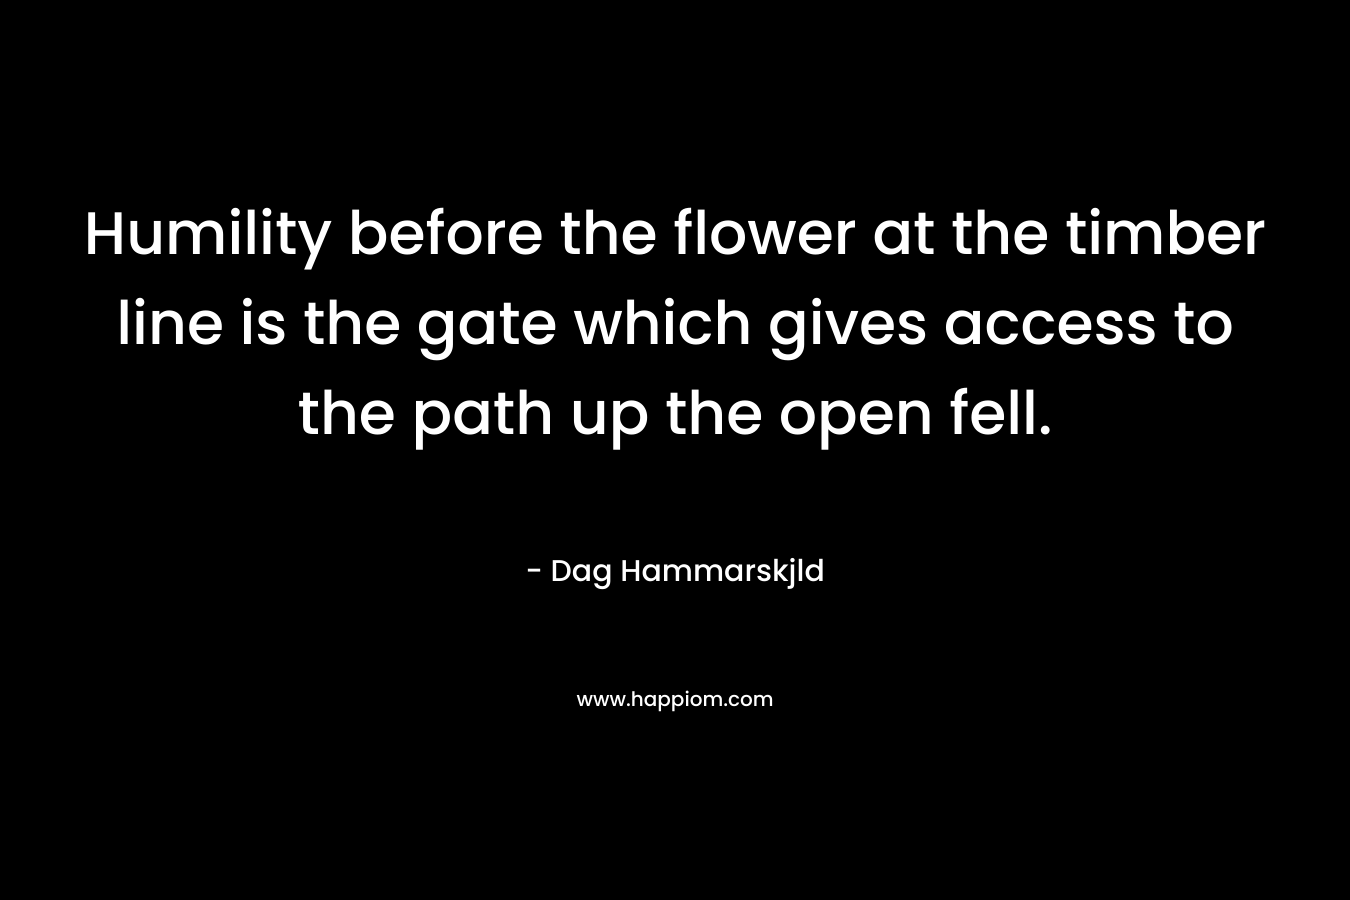 Humility before the flower at the timber line is the gate which gives access to the path up the open fell.